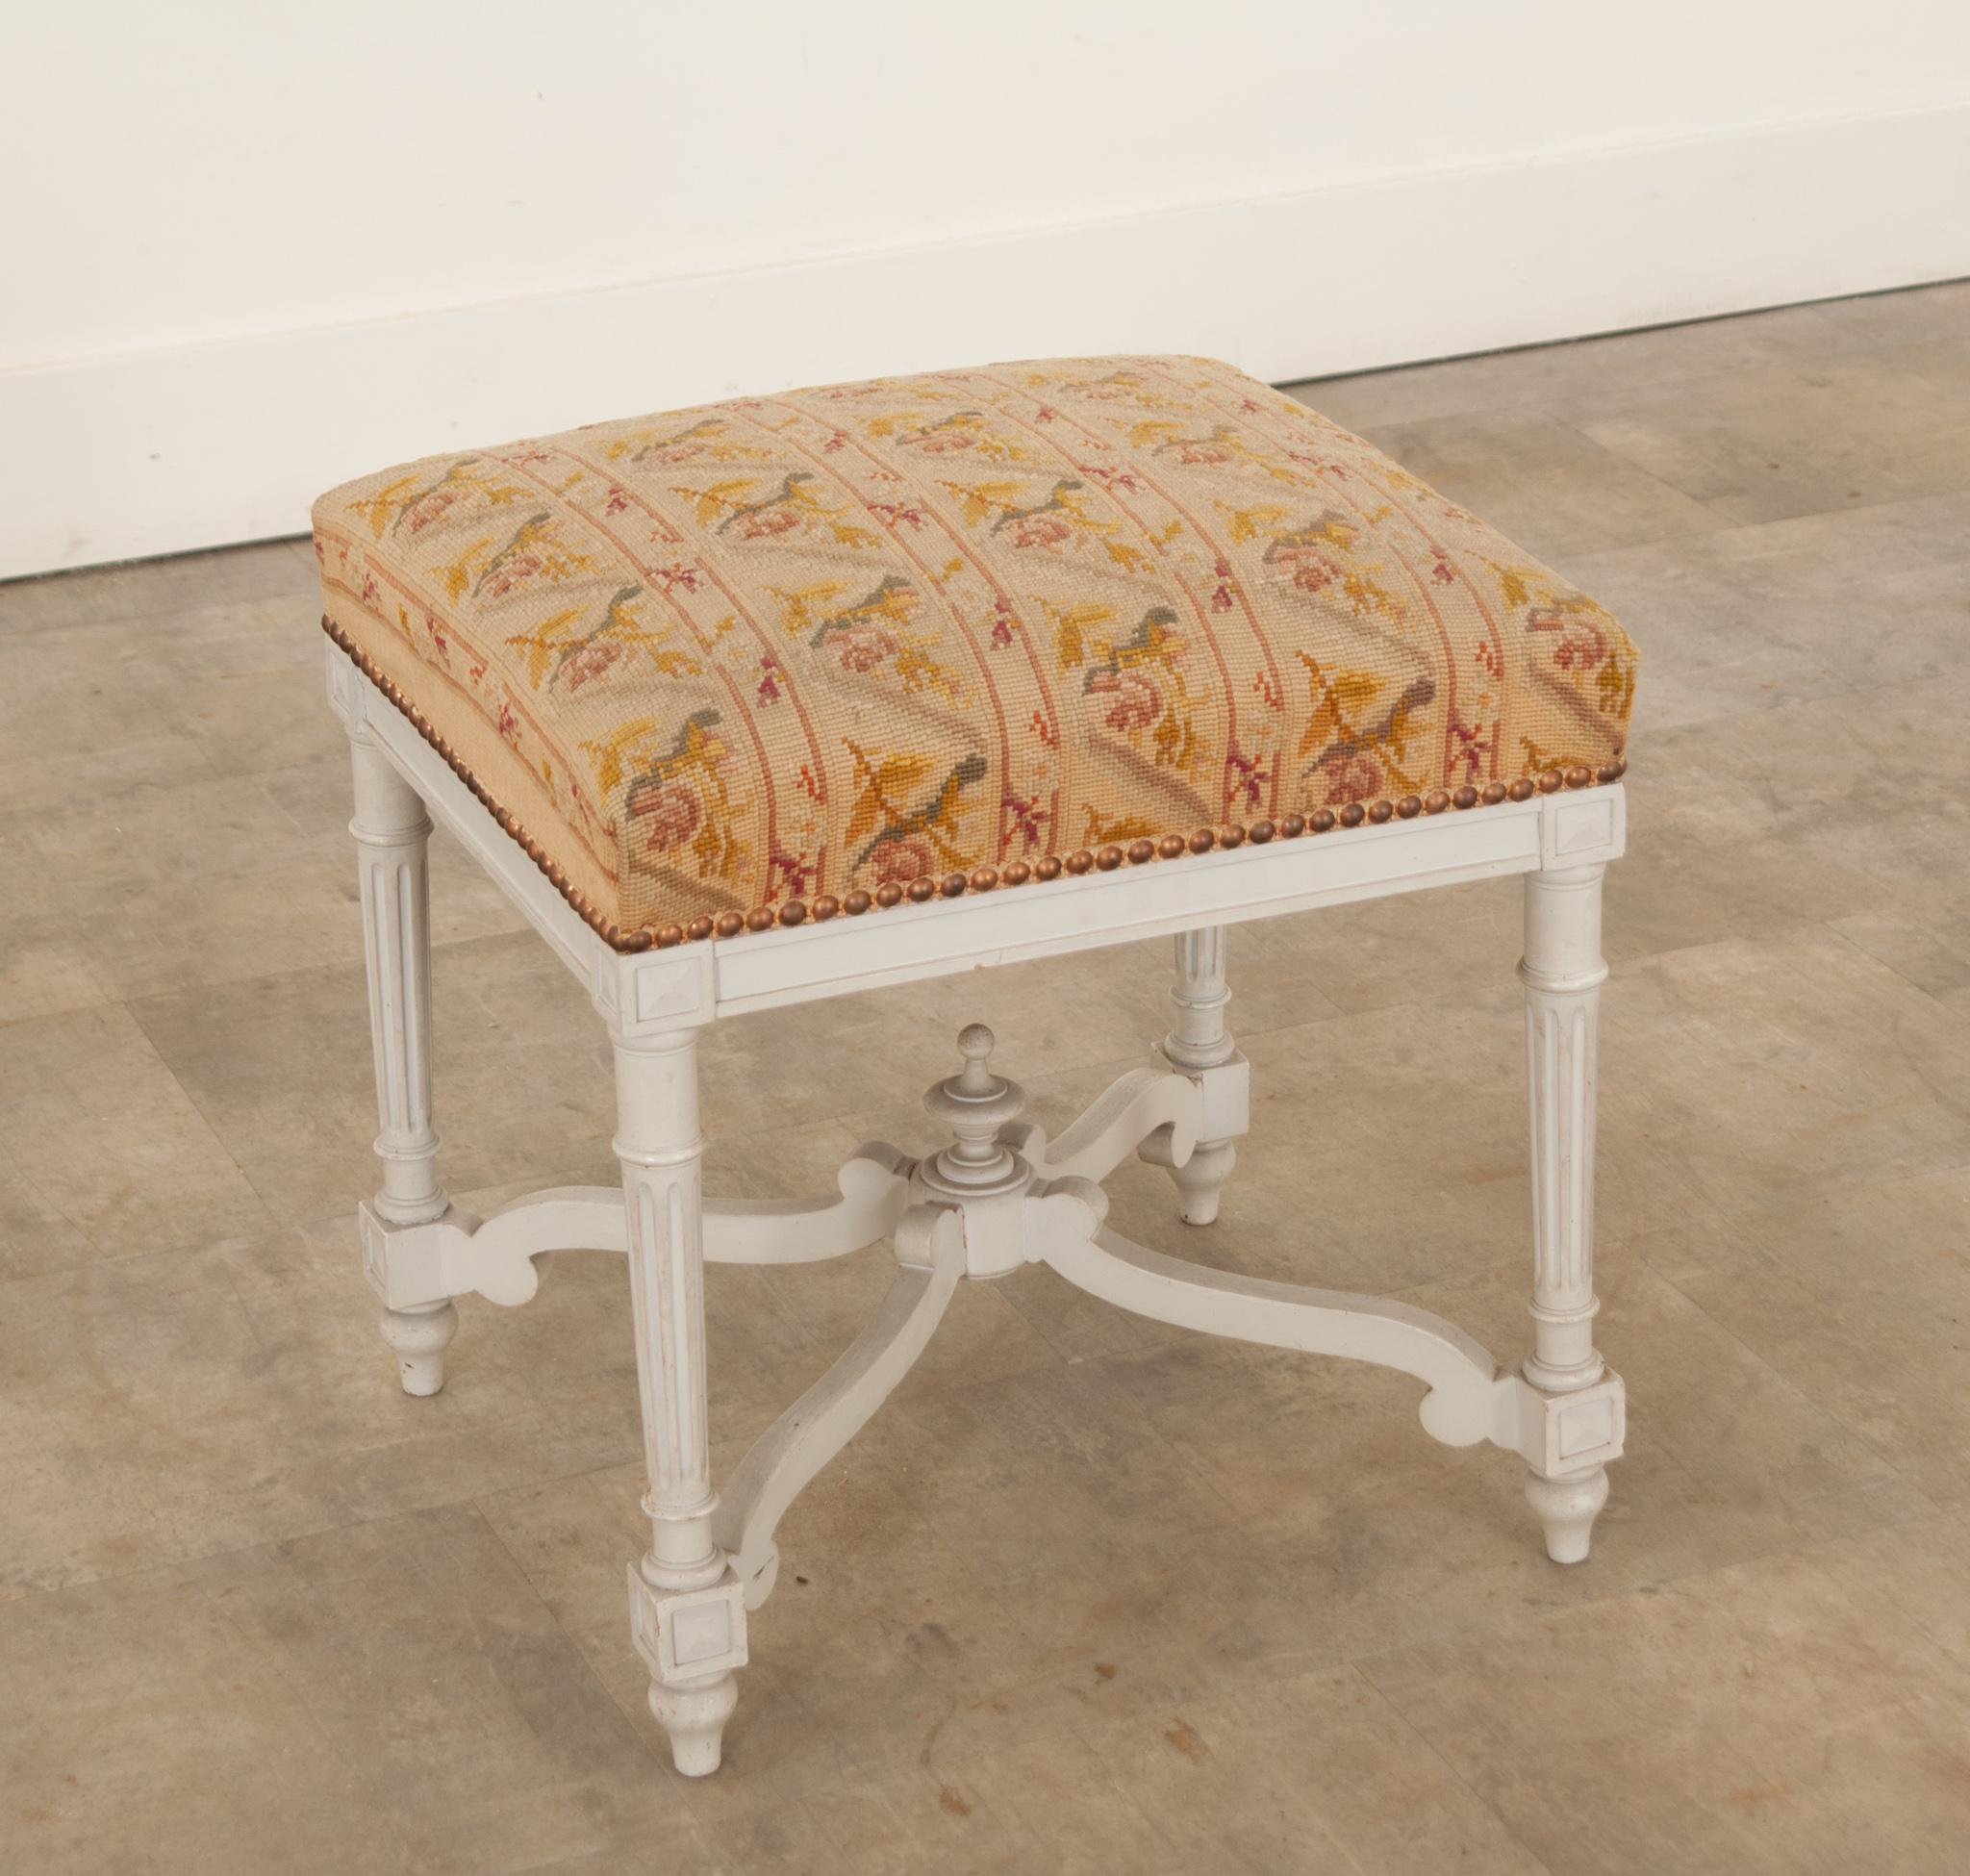 This delightful antique stool was hand-crafted in France, circa 1900. Square in shape, the stool stands on lovely turned and fluted legs connected to an elaborate, hand-carved, and shaped stretcher that meets in the center, topped with a decorative